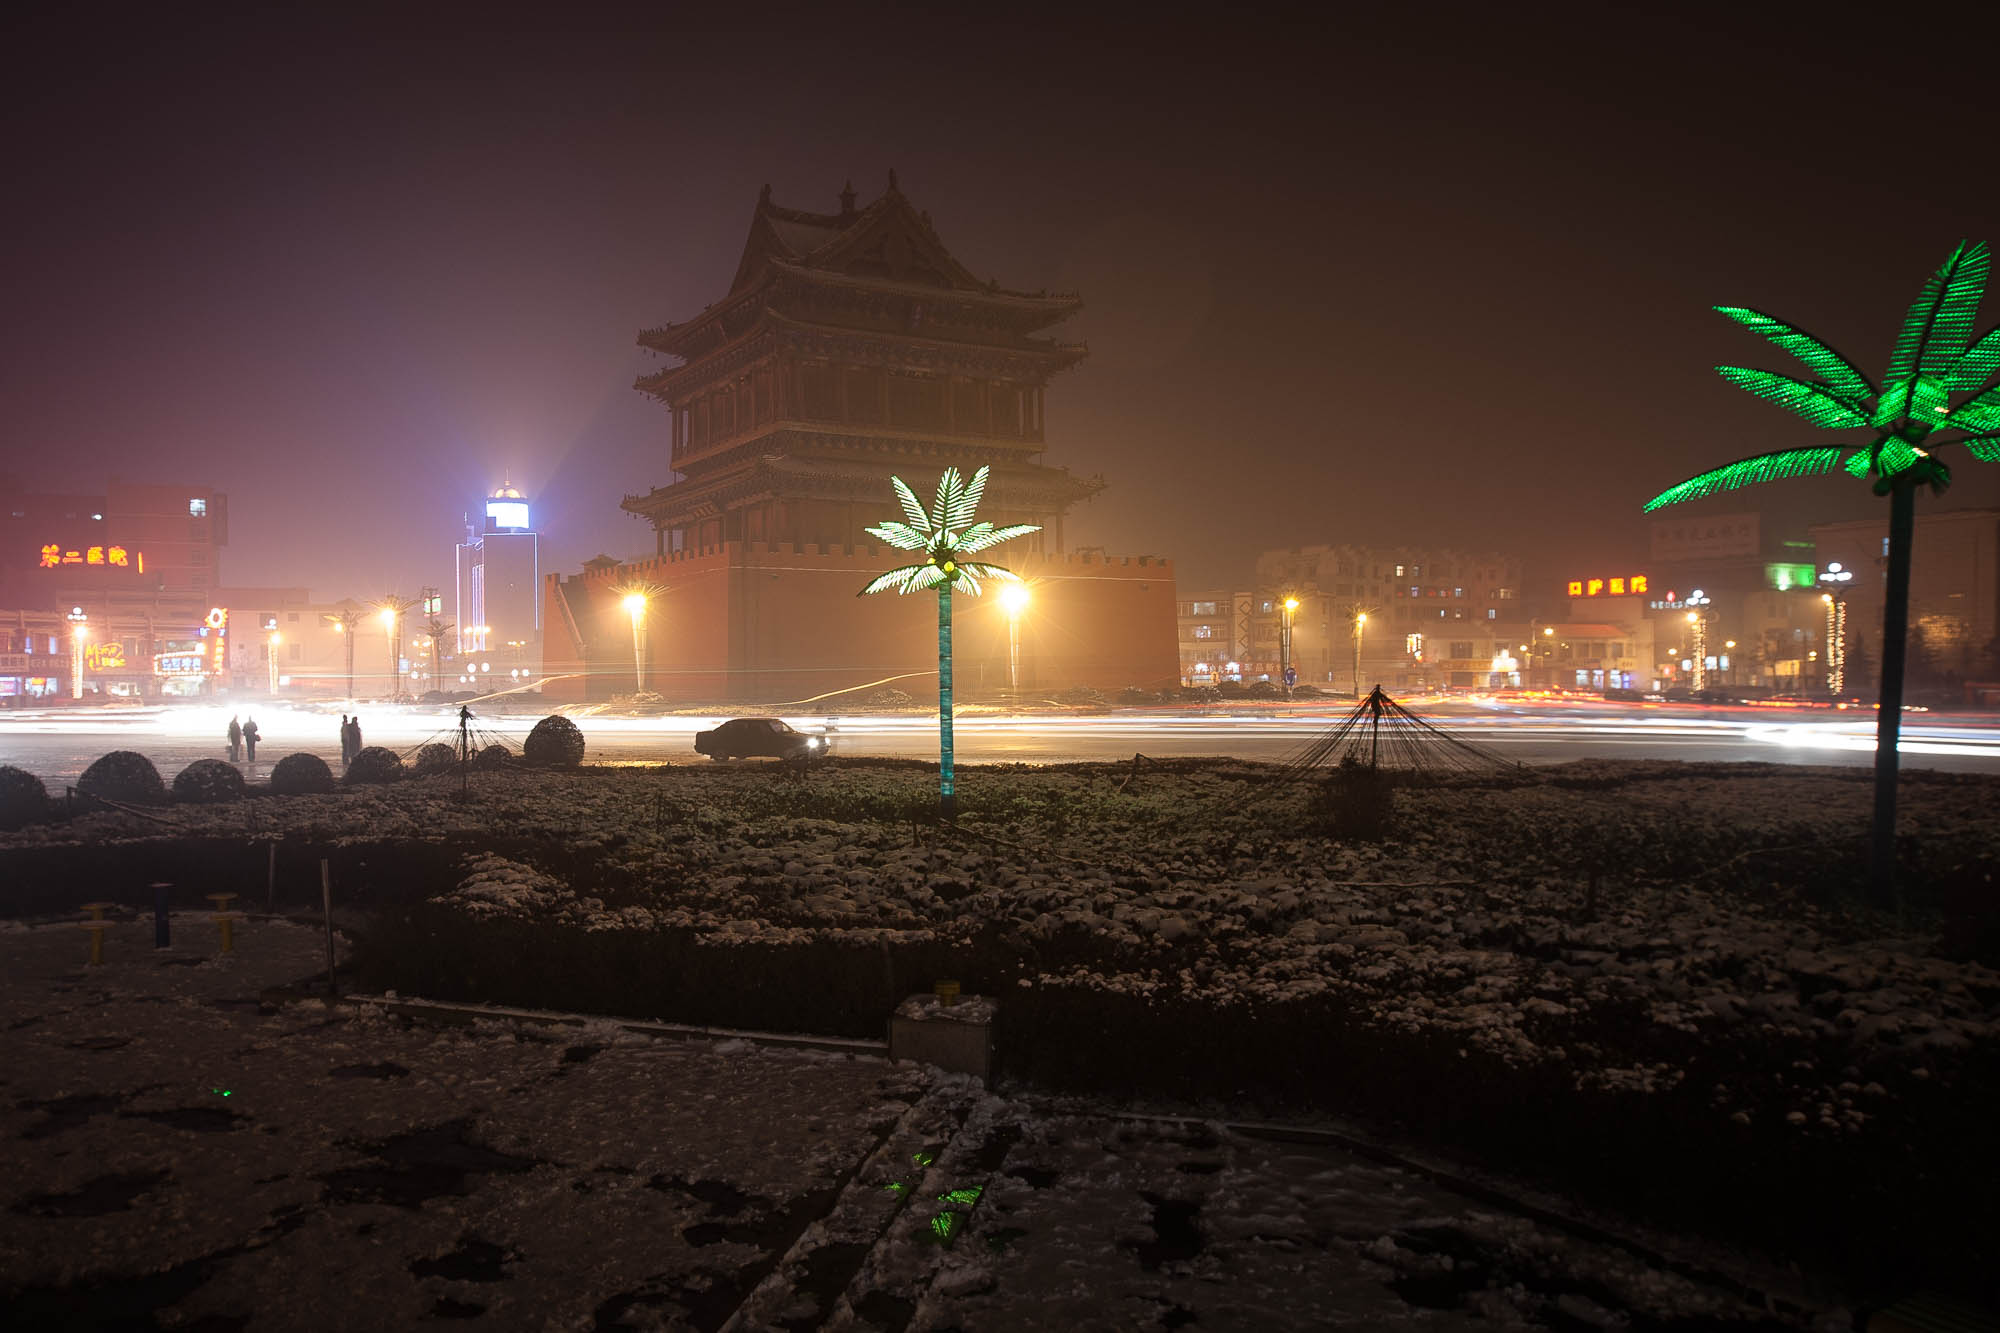 Linfen at night